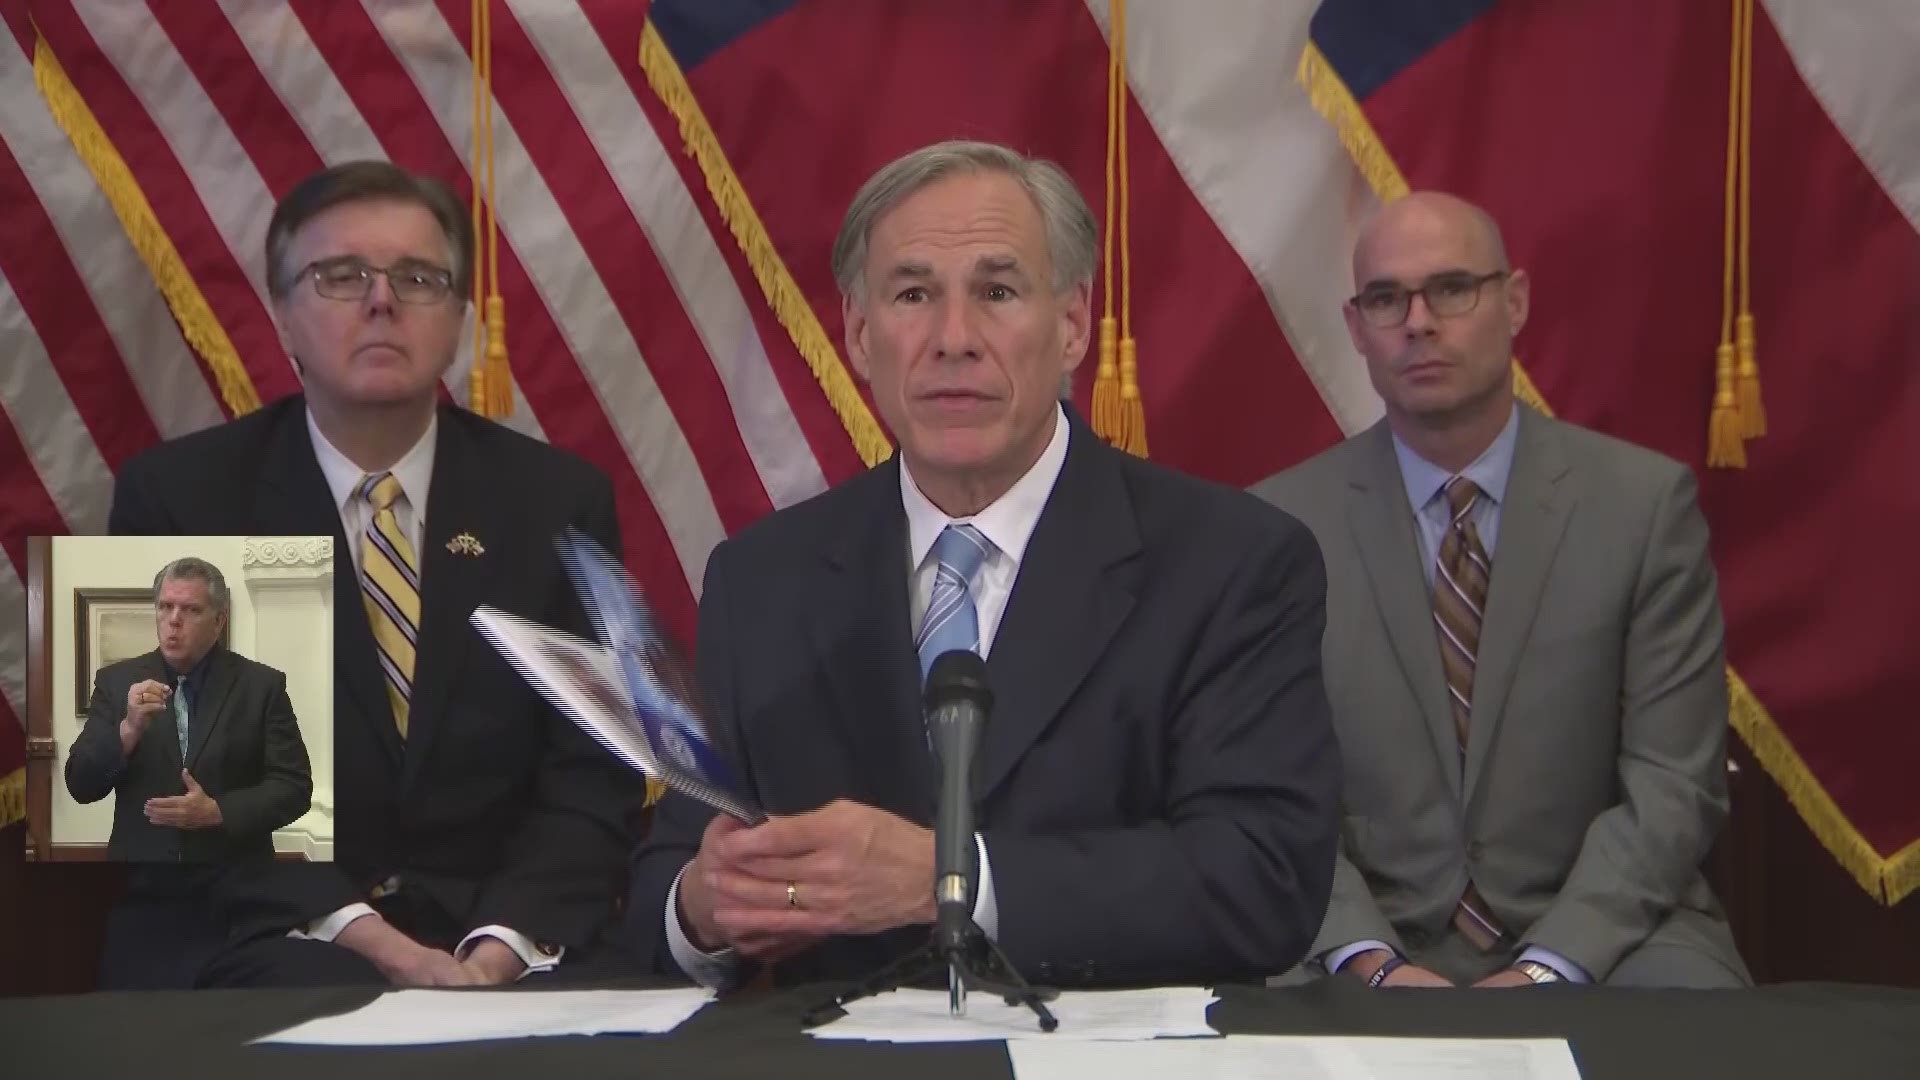 Gov. Abbott talked about a phased approach to re-opening the state and said that his order supersedes that of local governments.